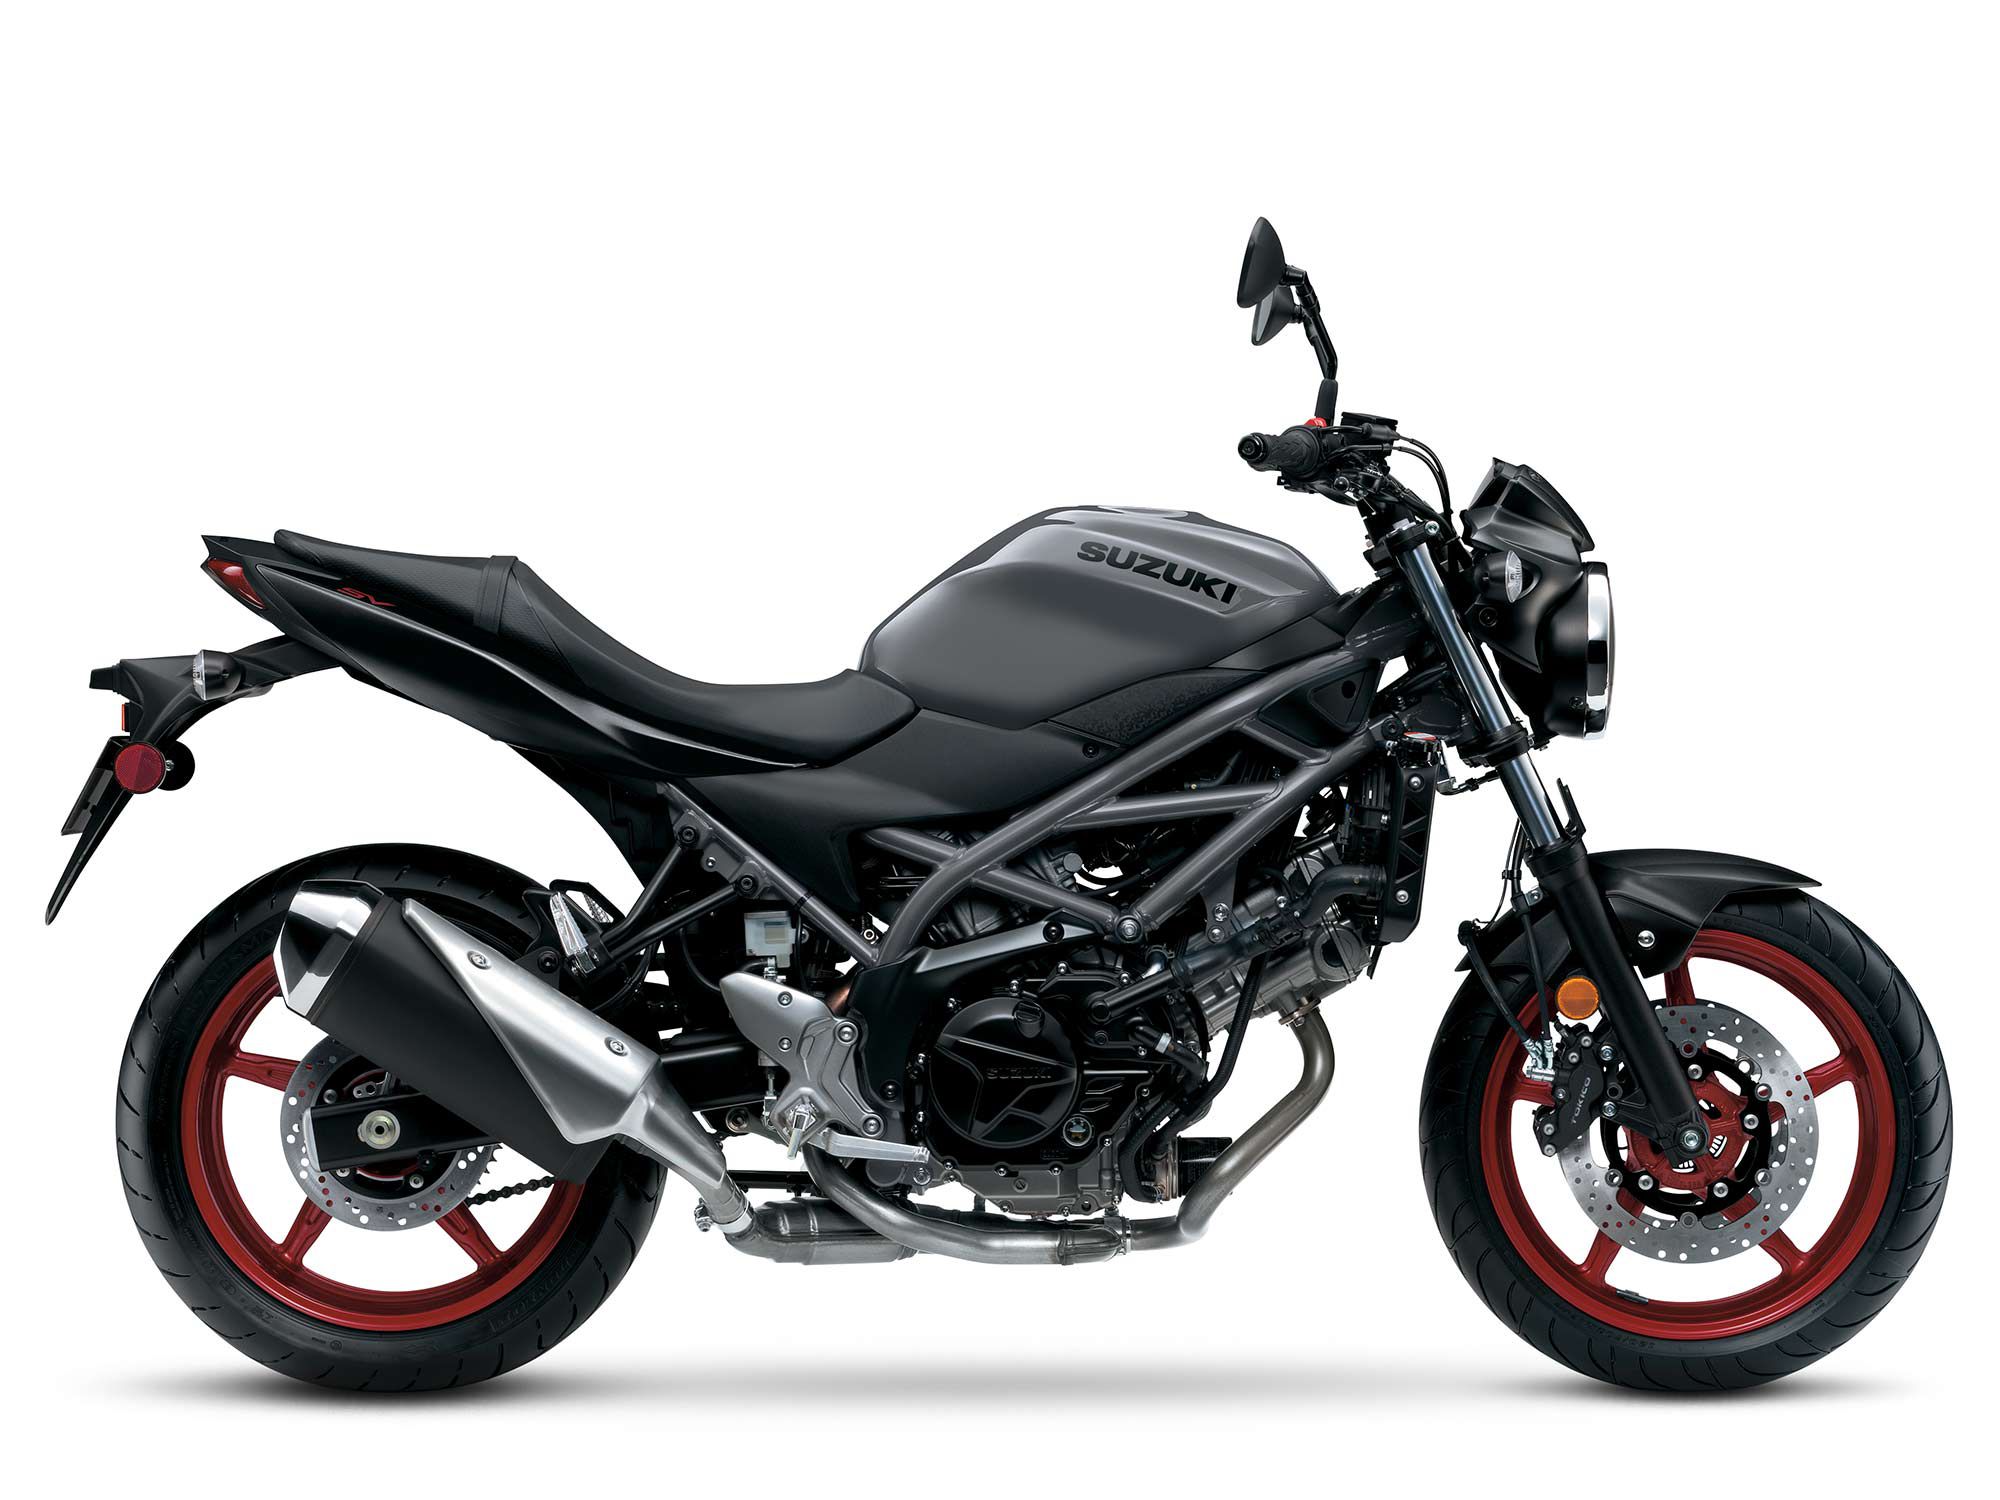 The 2023 Suzuki SV650 without ABS will start at $7,399.